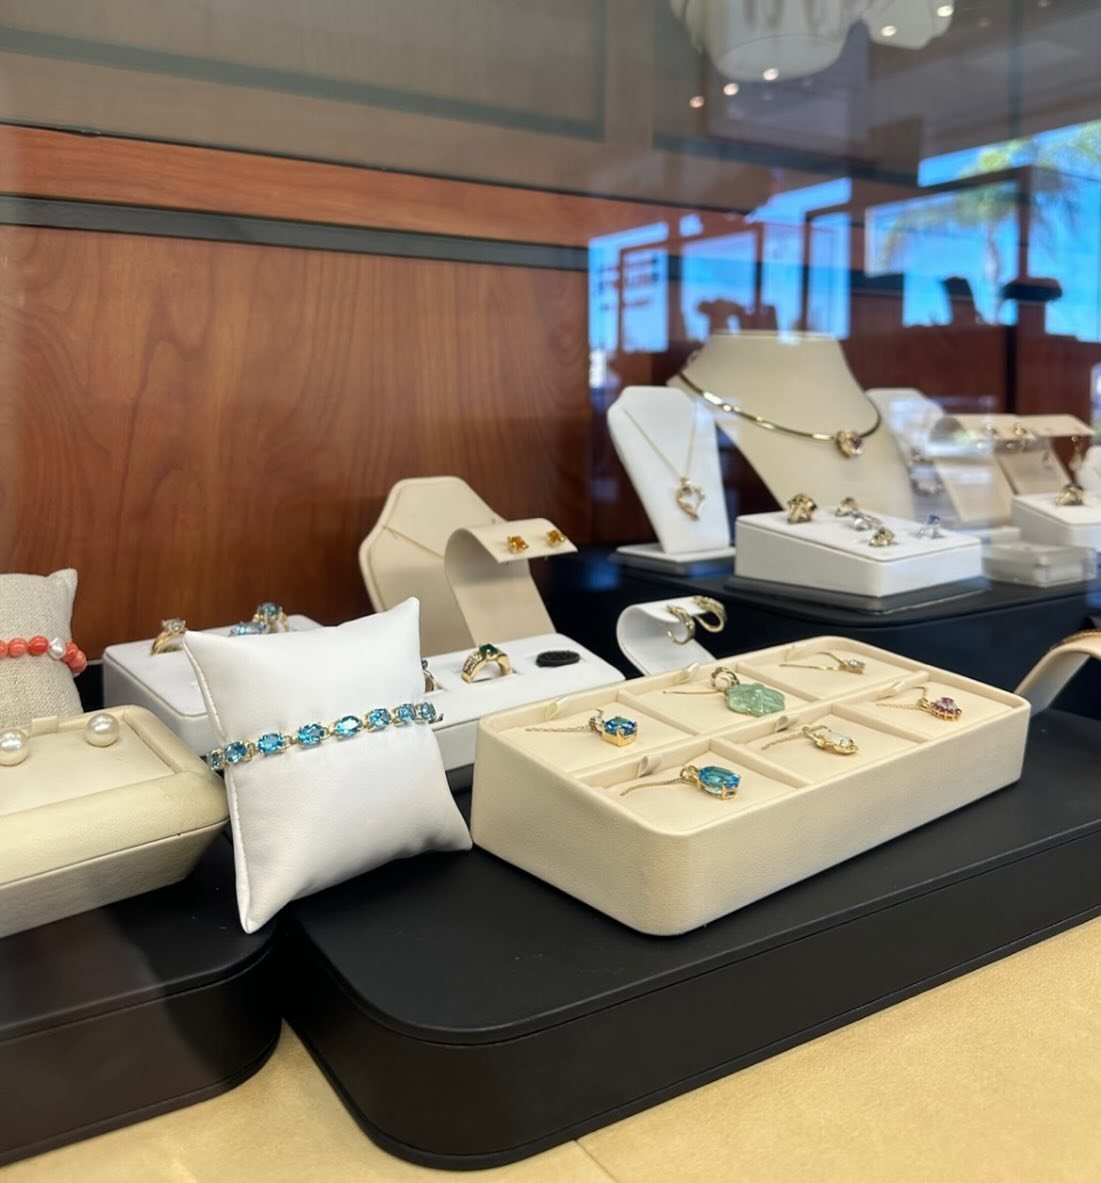 Mother&rsquo;s day is near!! Come into store today and find something your Mother will cherish.💝
.
.
.
#HTimWilliams #Smallbusiness #Familyowned #Sandiegojeweler #Custom #Shoplocal #Timeless #Handcrafted #Jewelrylover #Highjewerly #Accessories #Desi